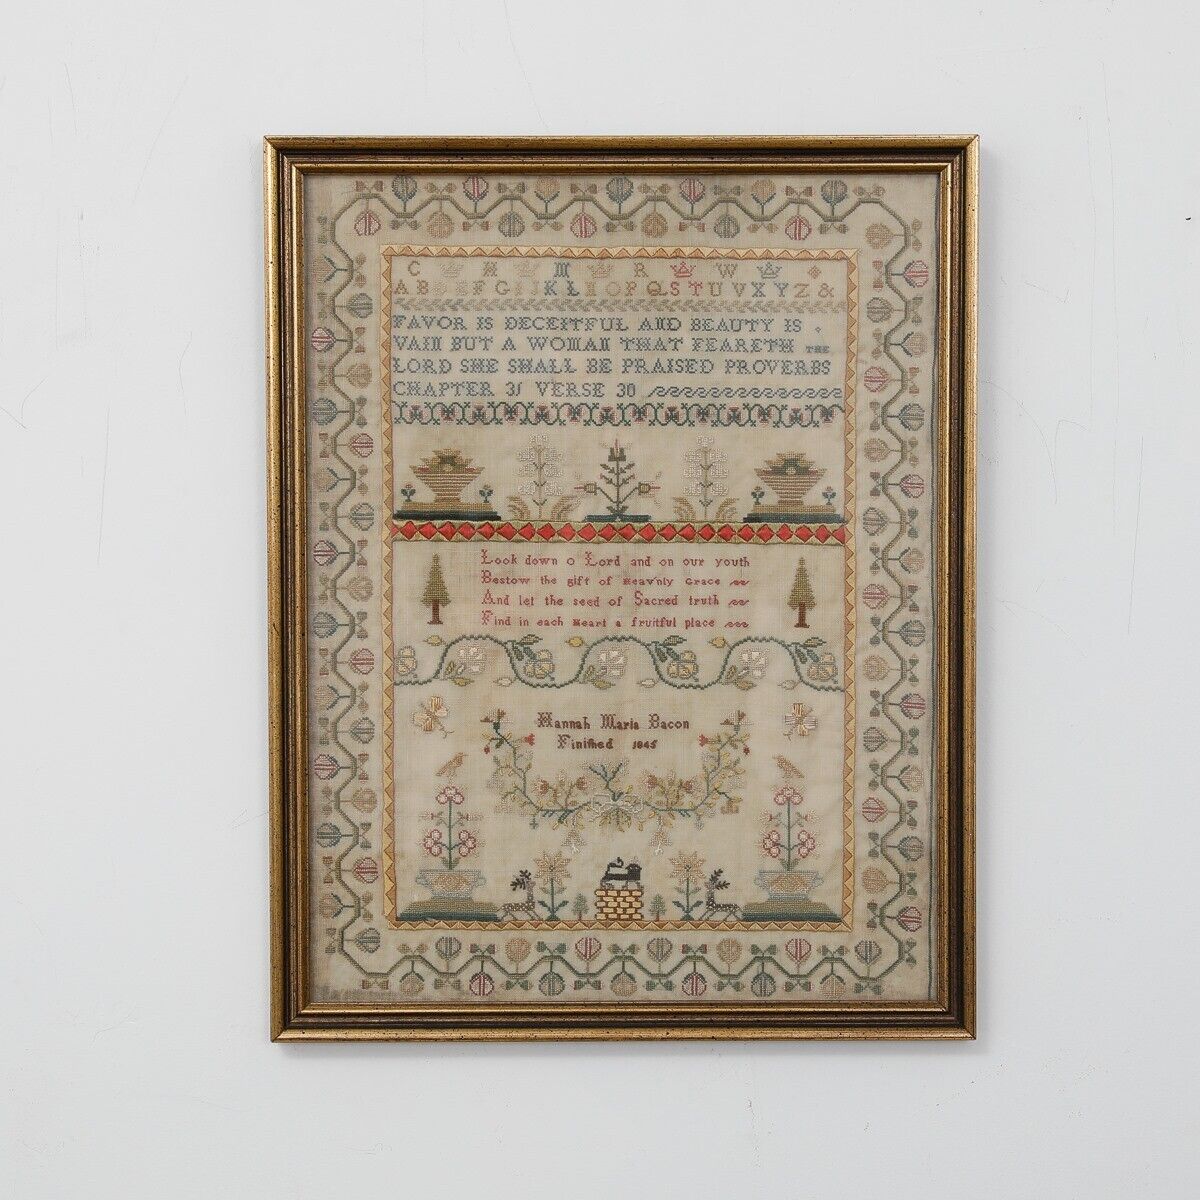 Antique Framed Hand Embroidery Hannah Bacon 1845 Bible Proverbs Verse 18.5x14.5